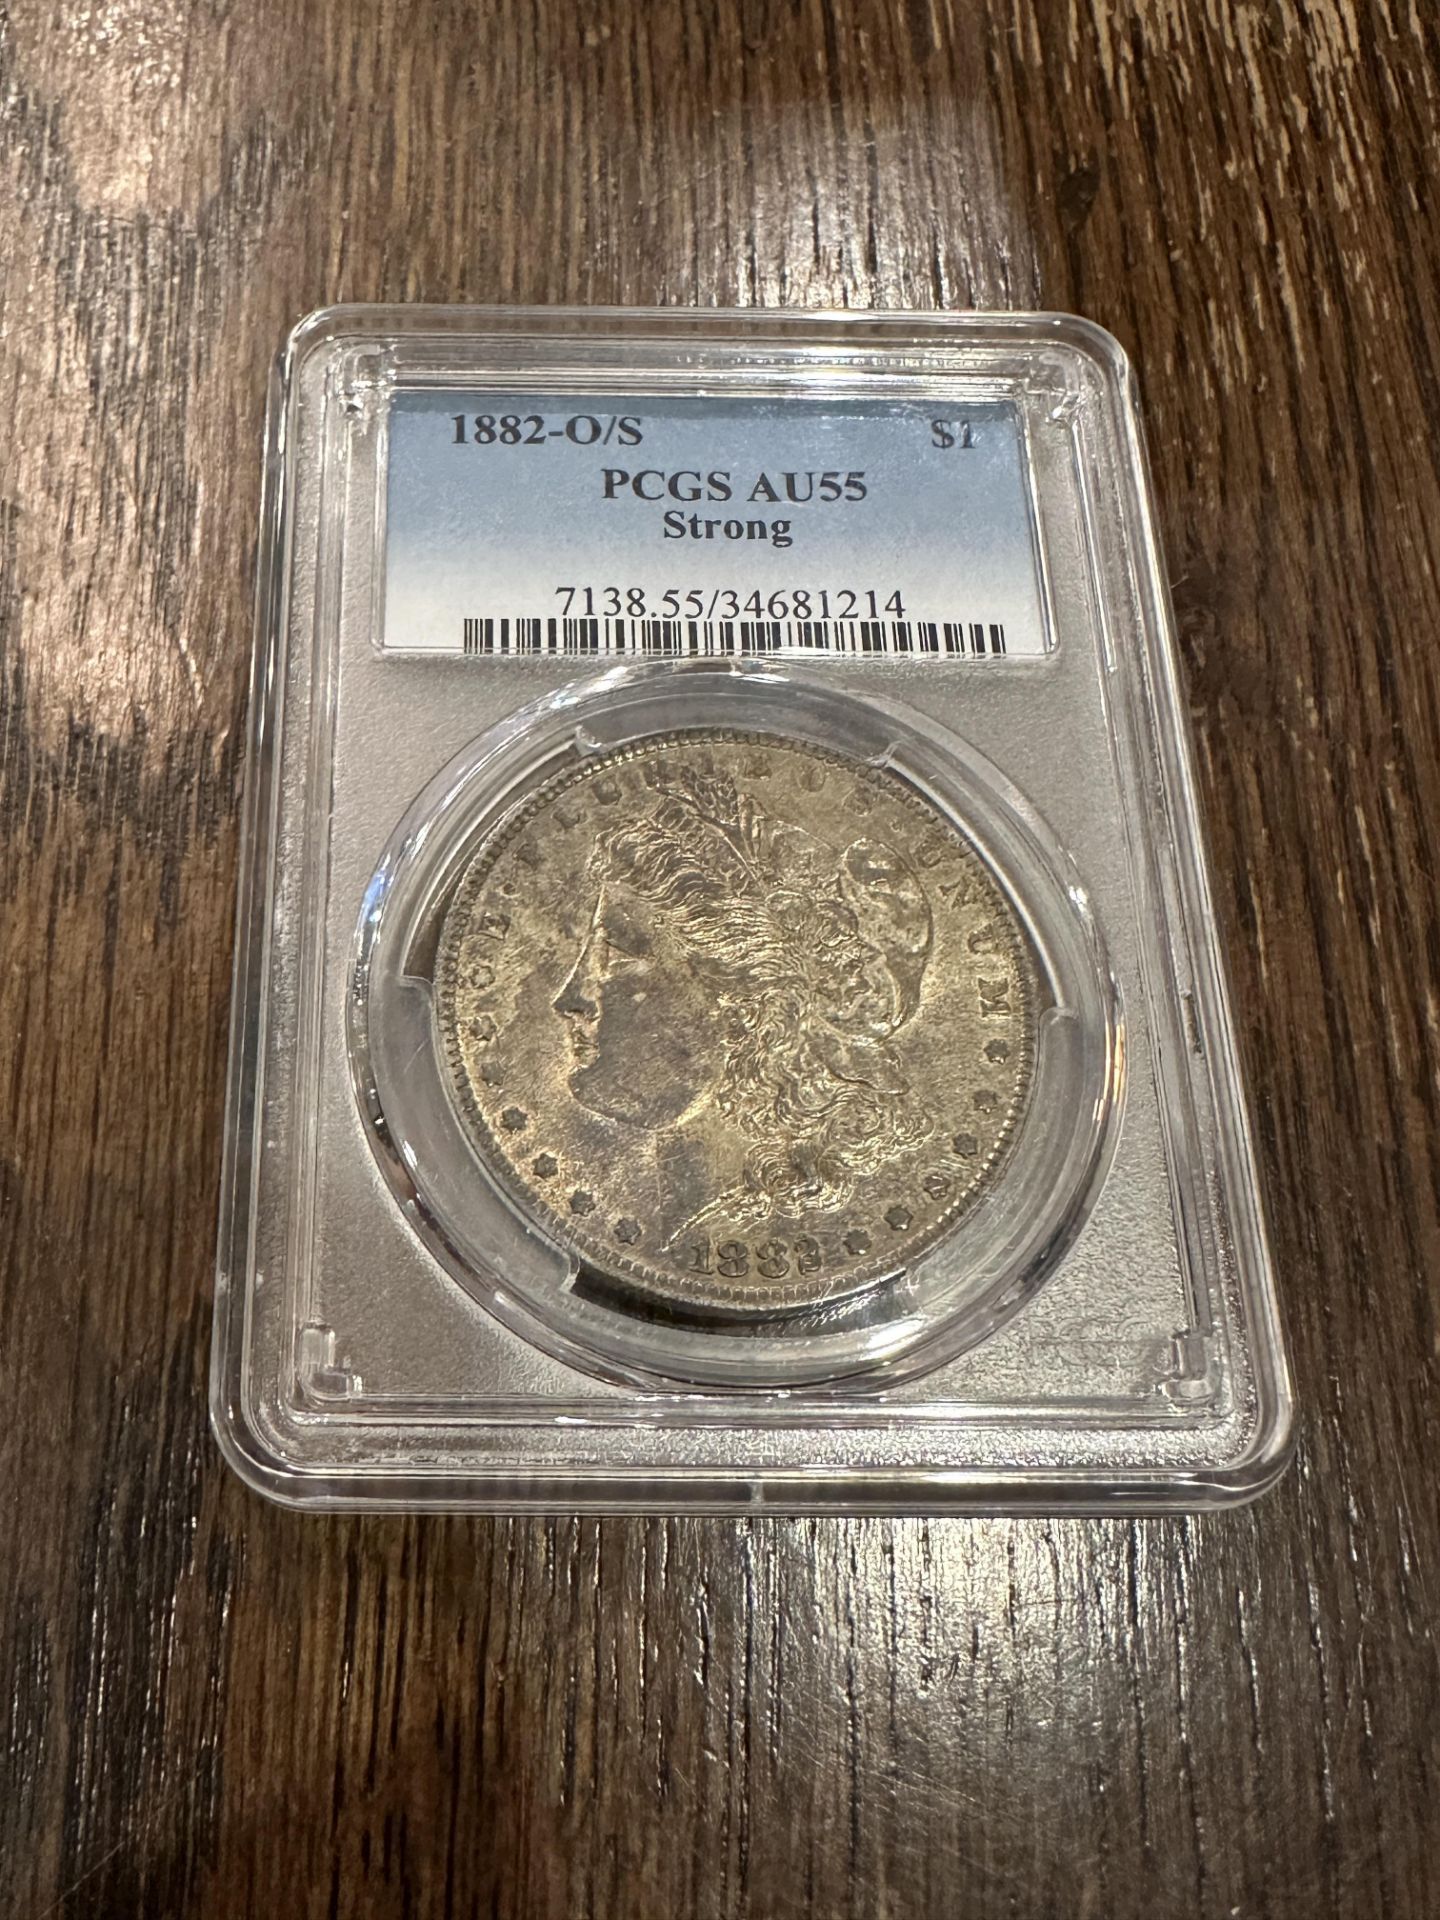 PCGS AU55 STRONG 1882-0/S $1 COIN VALUED $750